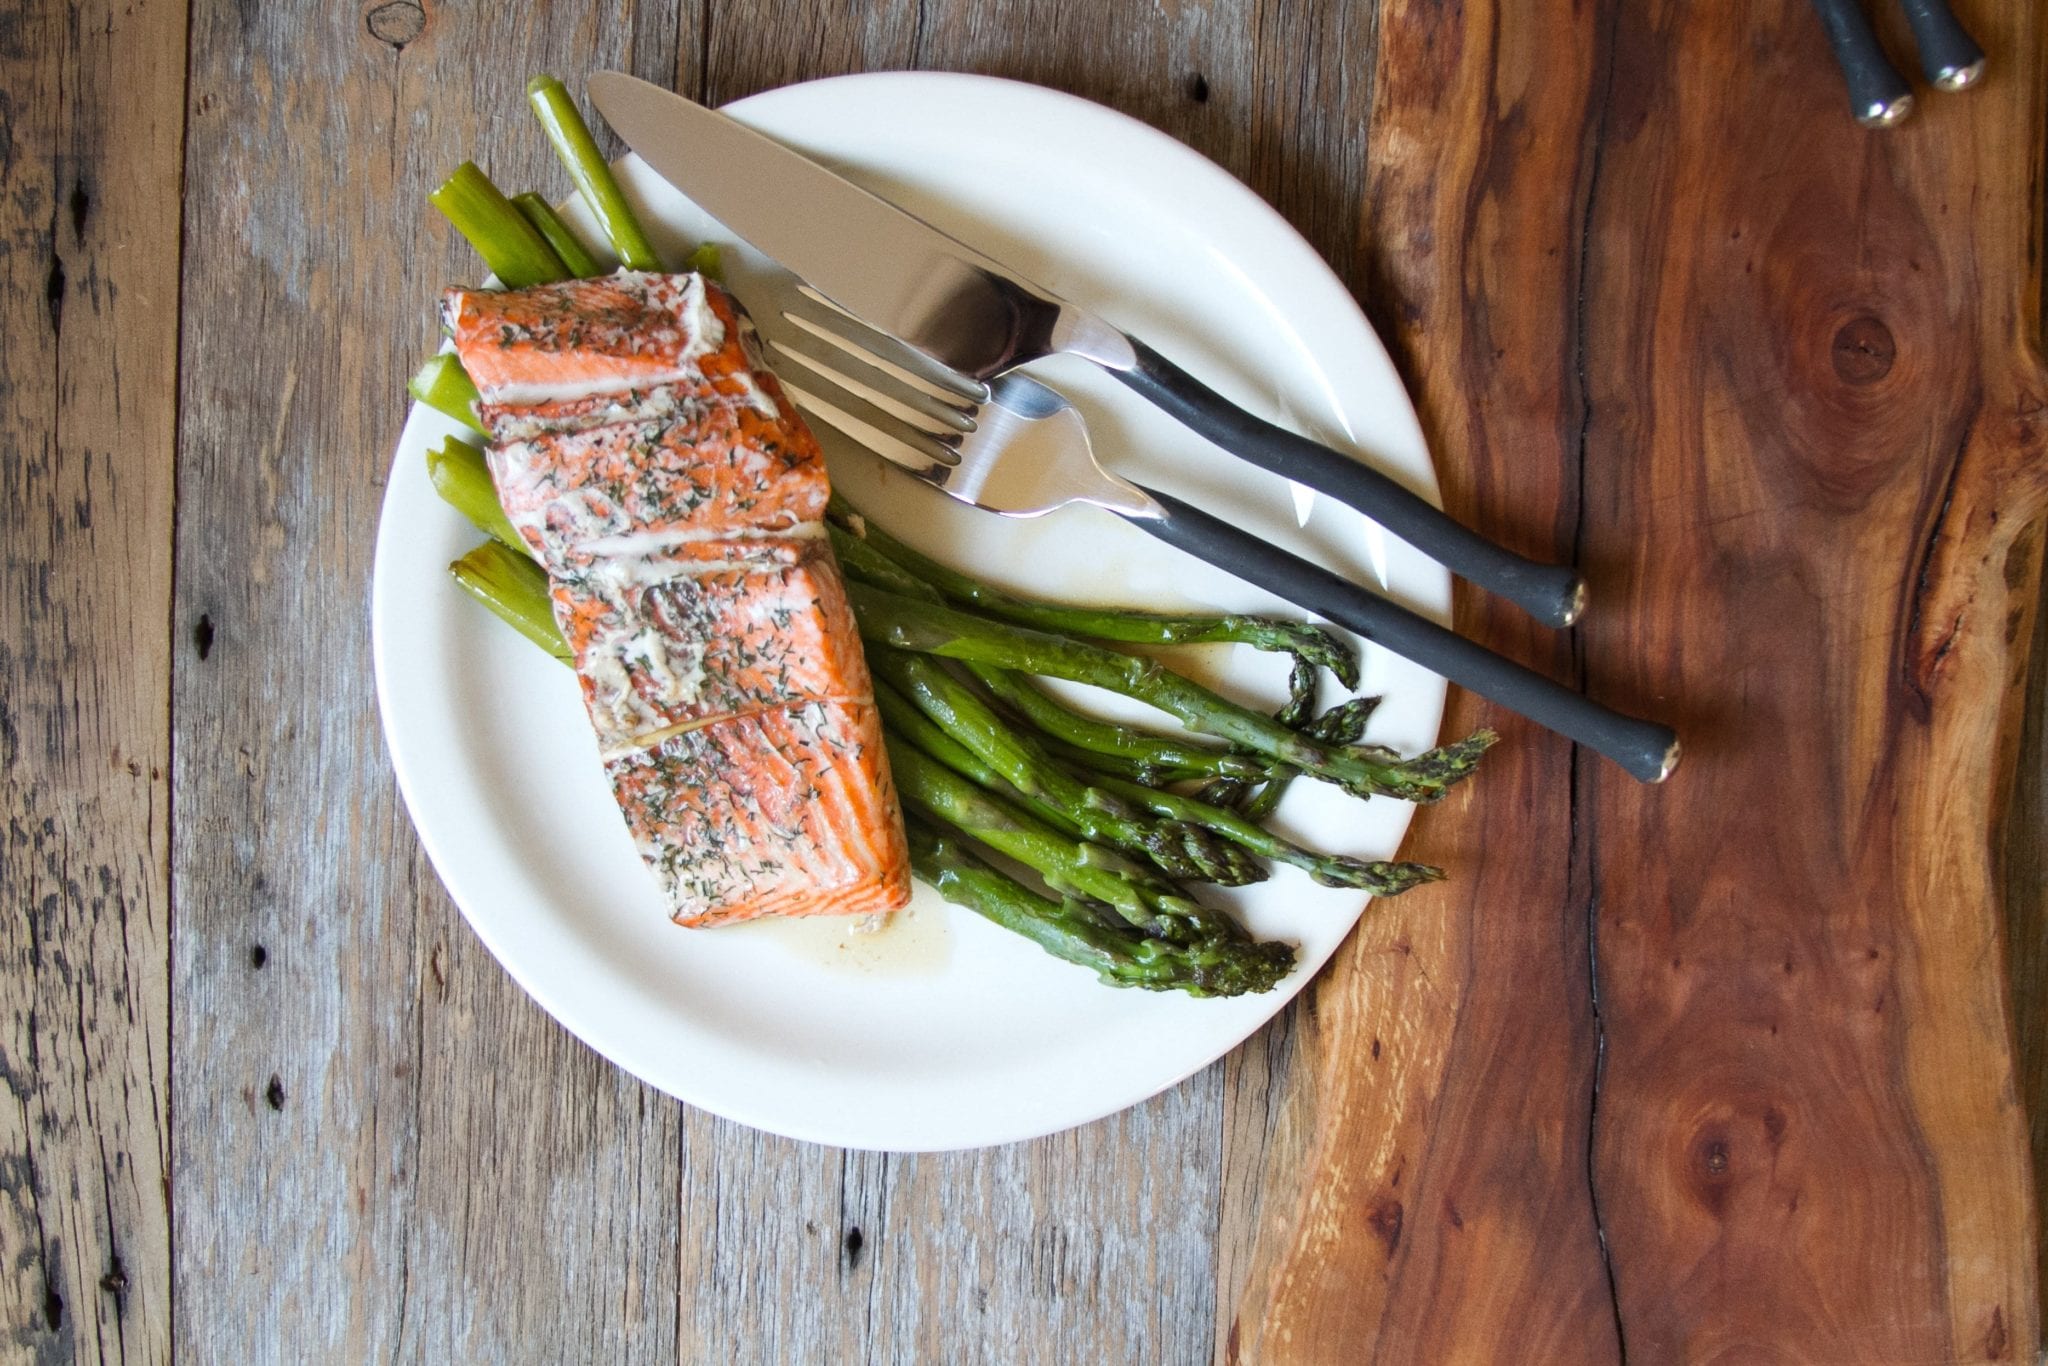 The Best Baked Salmon And Asparagus You'll Ever Have!